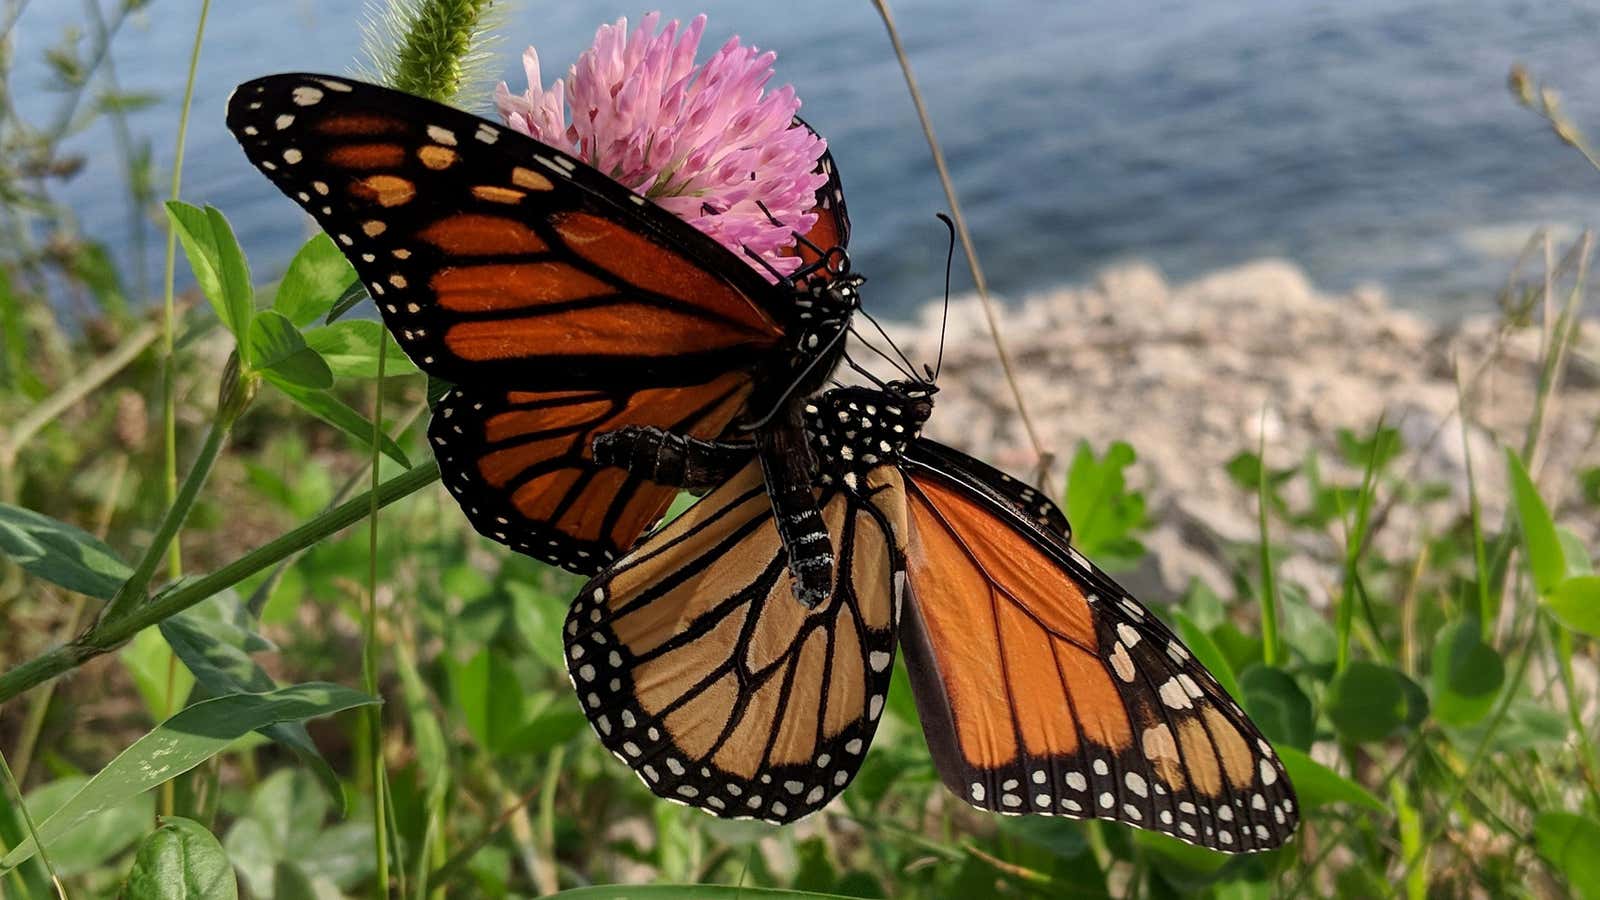 Last of the migrating monarchs?